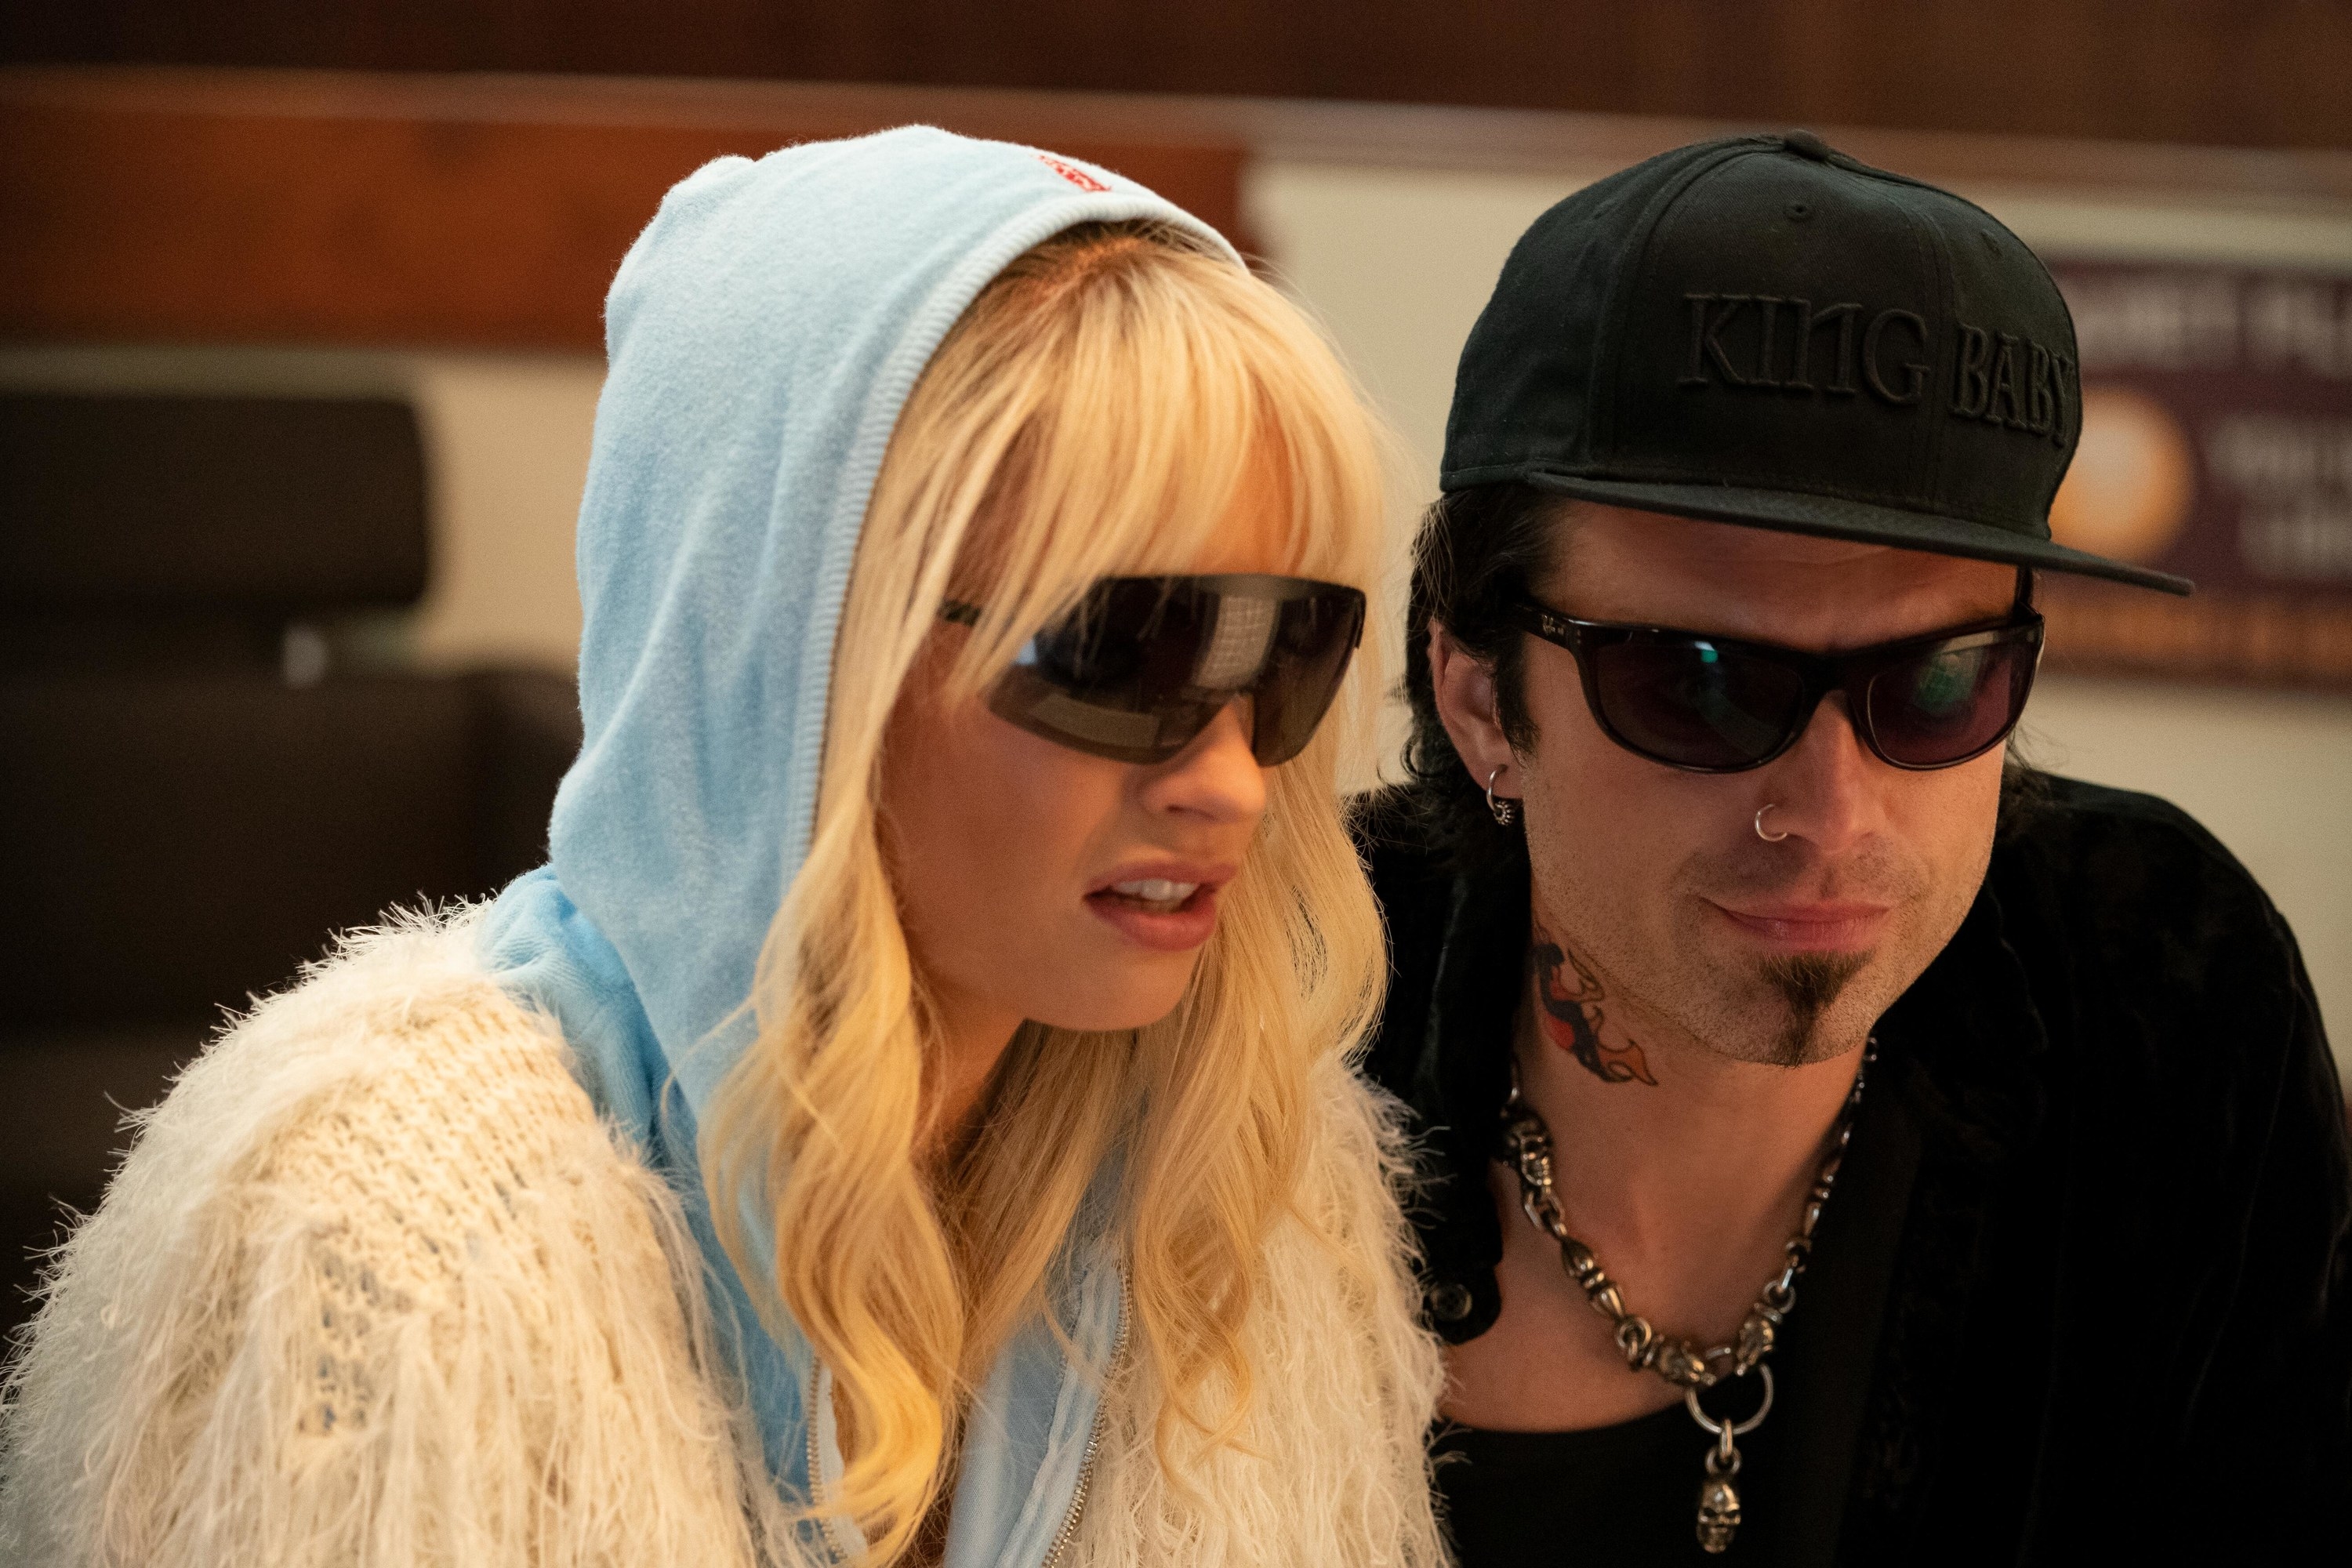 Pam and Tommy, both wearing sunglasses, as they crouch down to look at something in a scene from the series